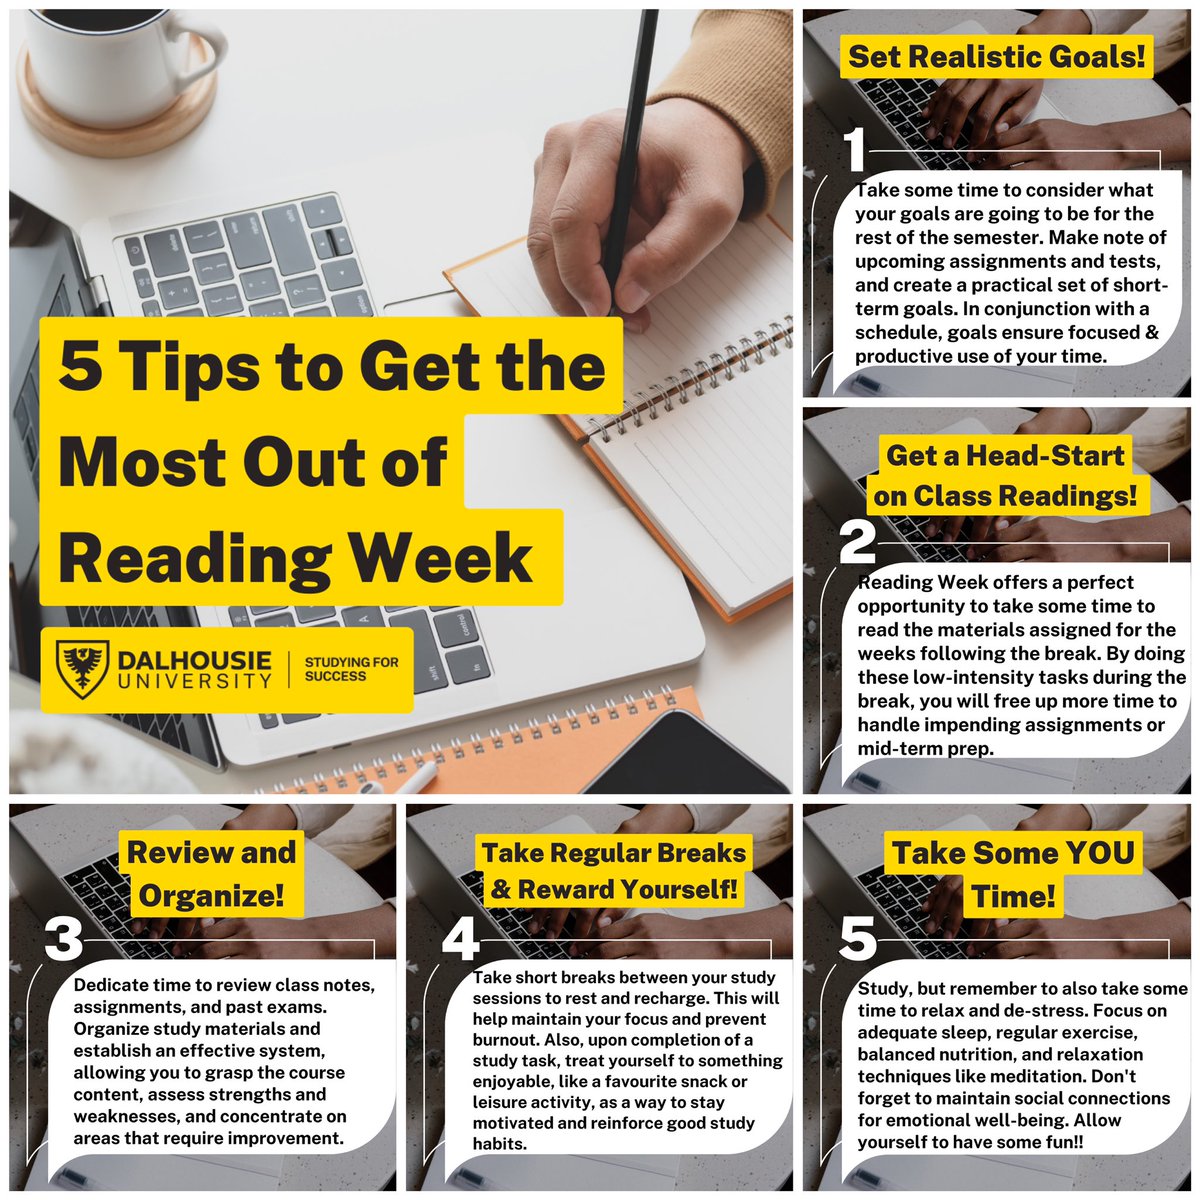 So you have an entire week off from school. Here's how to get the most out of your Reading Week. #StudentSupport #StudentSuccess #DalhousieU #DalhousieUniversity #DalStudentLife #StudentLife #DalStudentSuccess #StudySmarter #DalhousieStudying